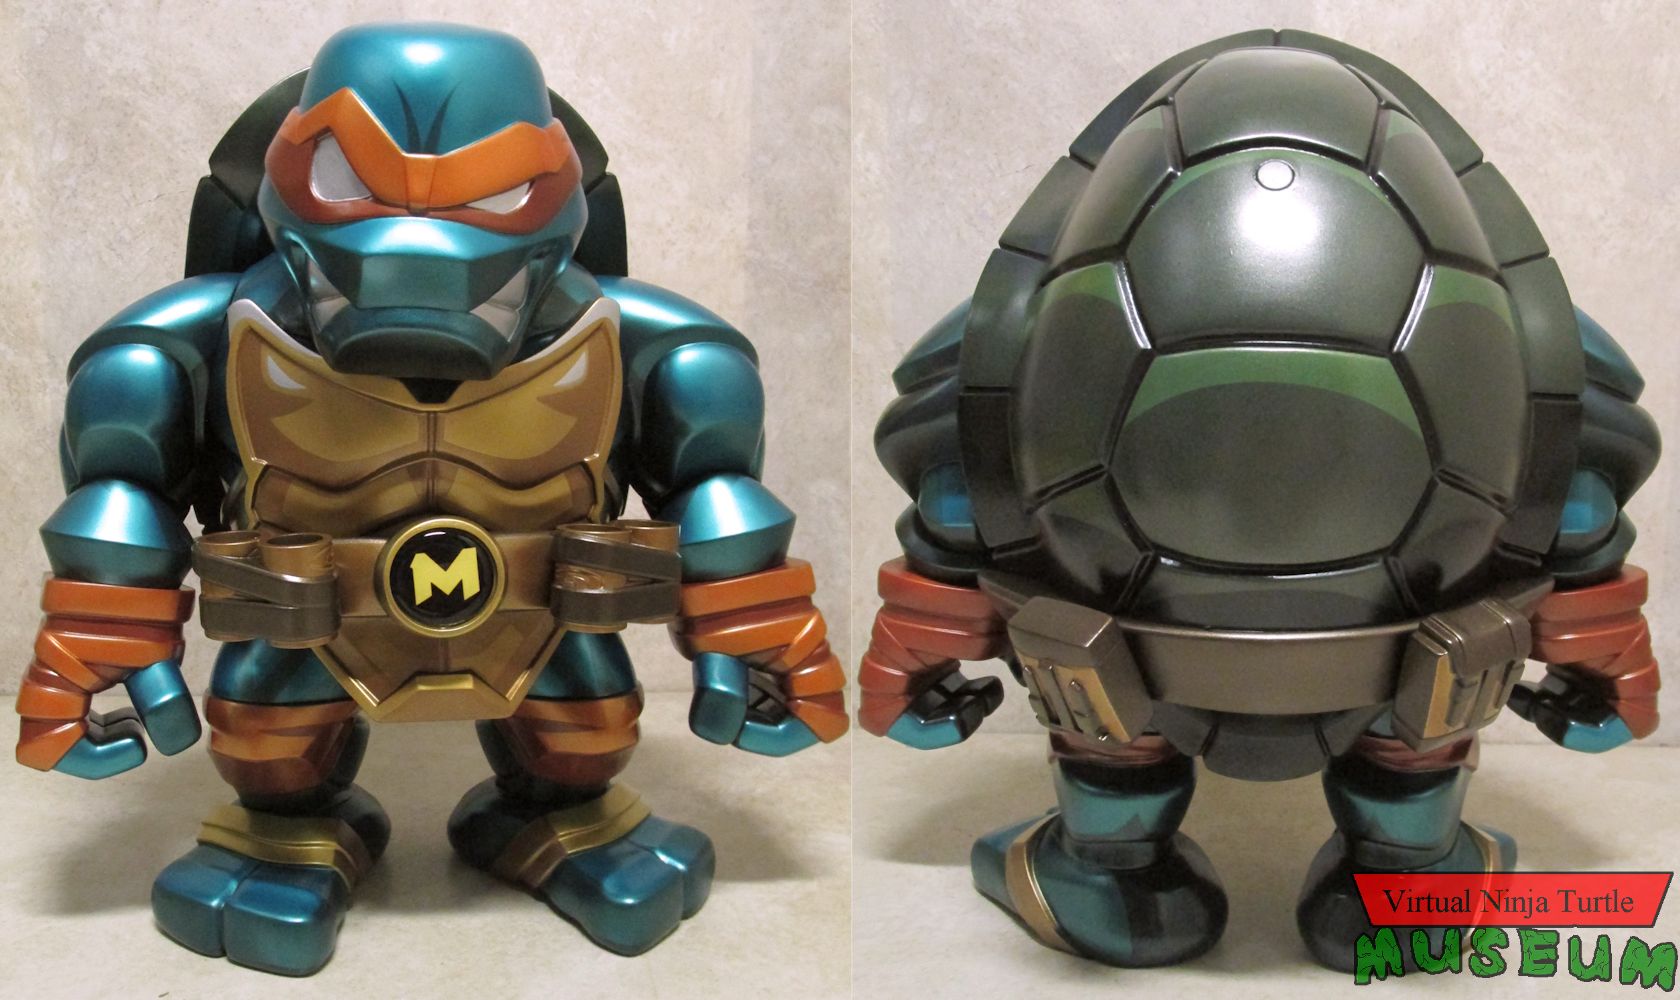 Metallic Edition Michelangelo front and back